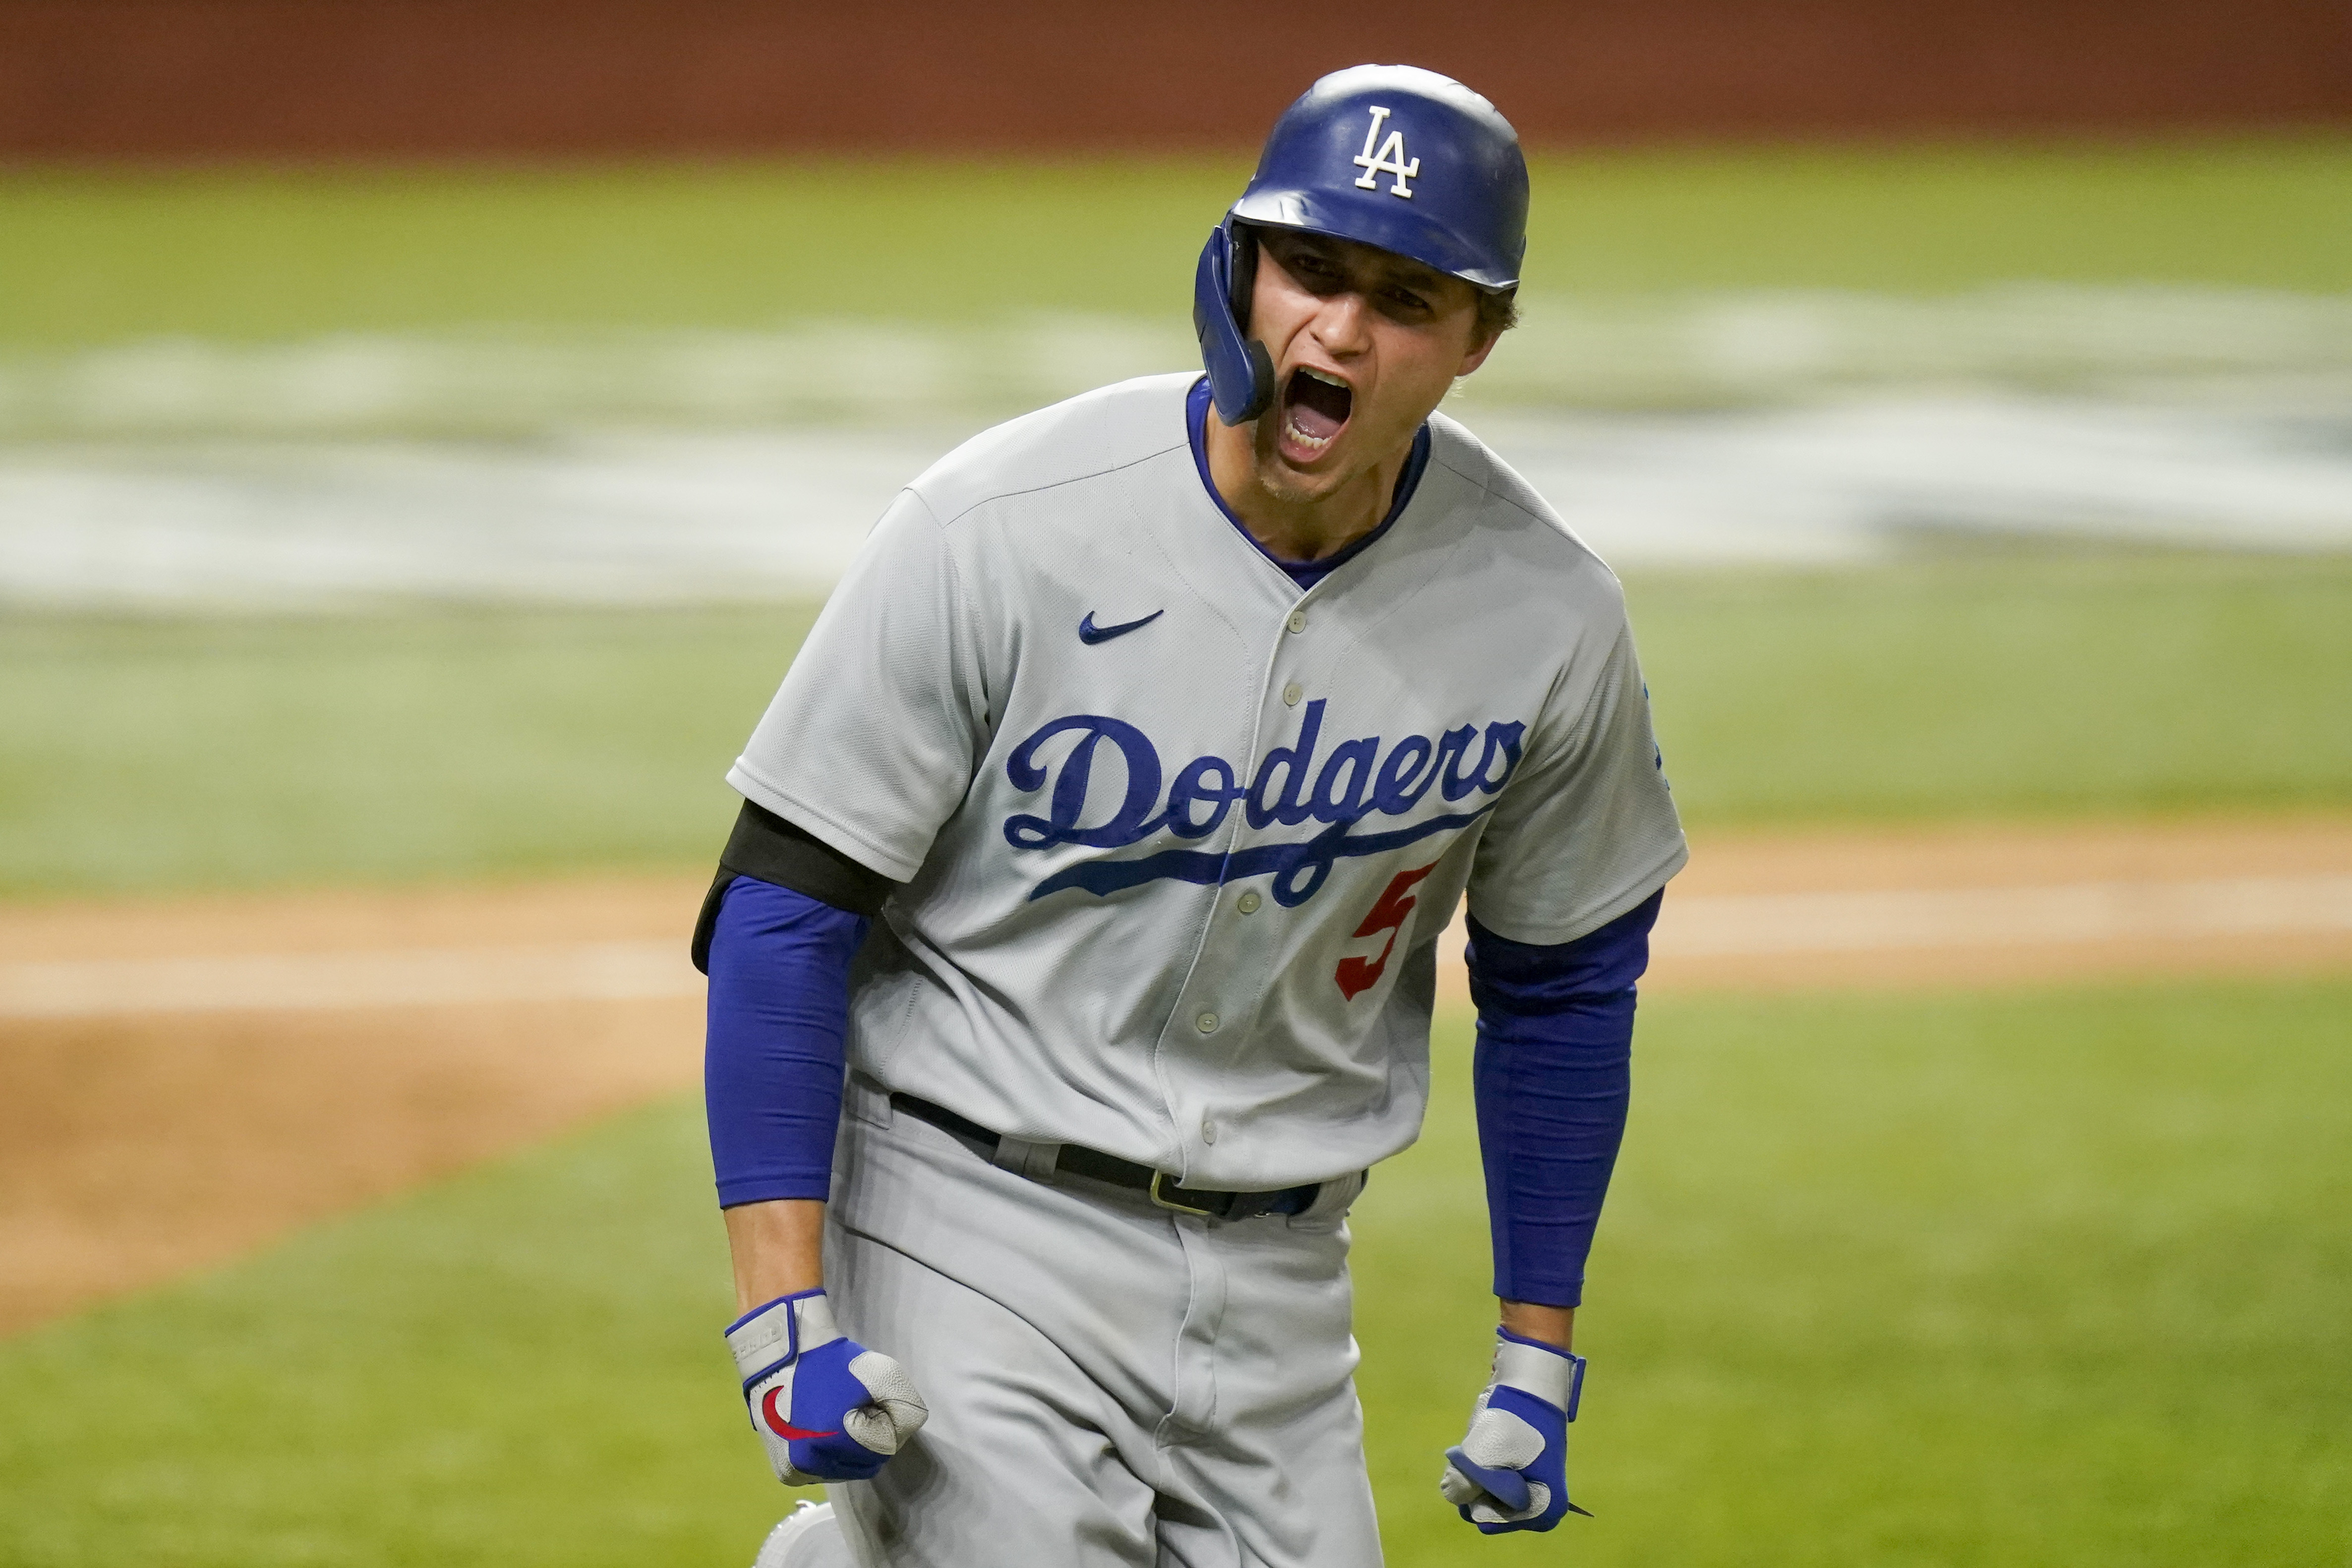 Corey Seager is one of the top free agent shortstops of this class